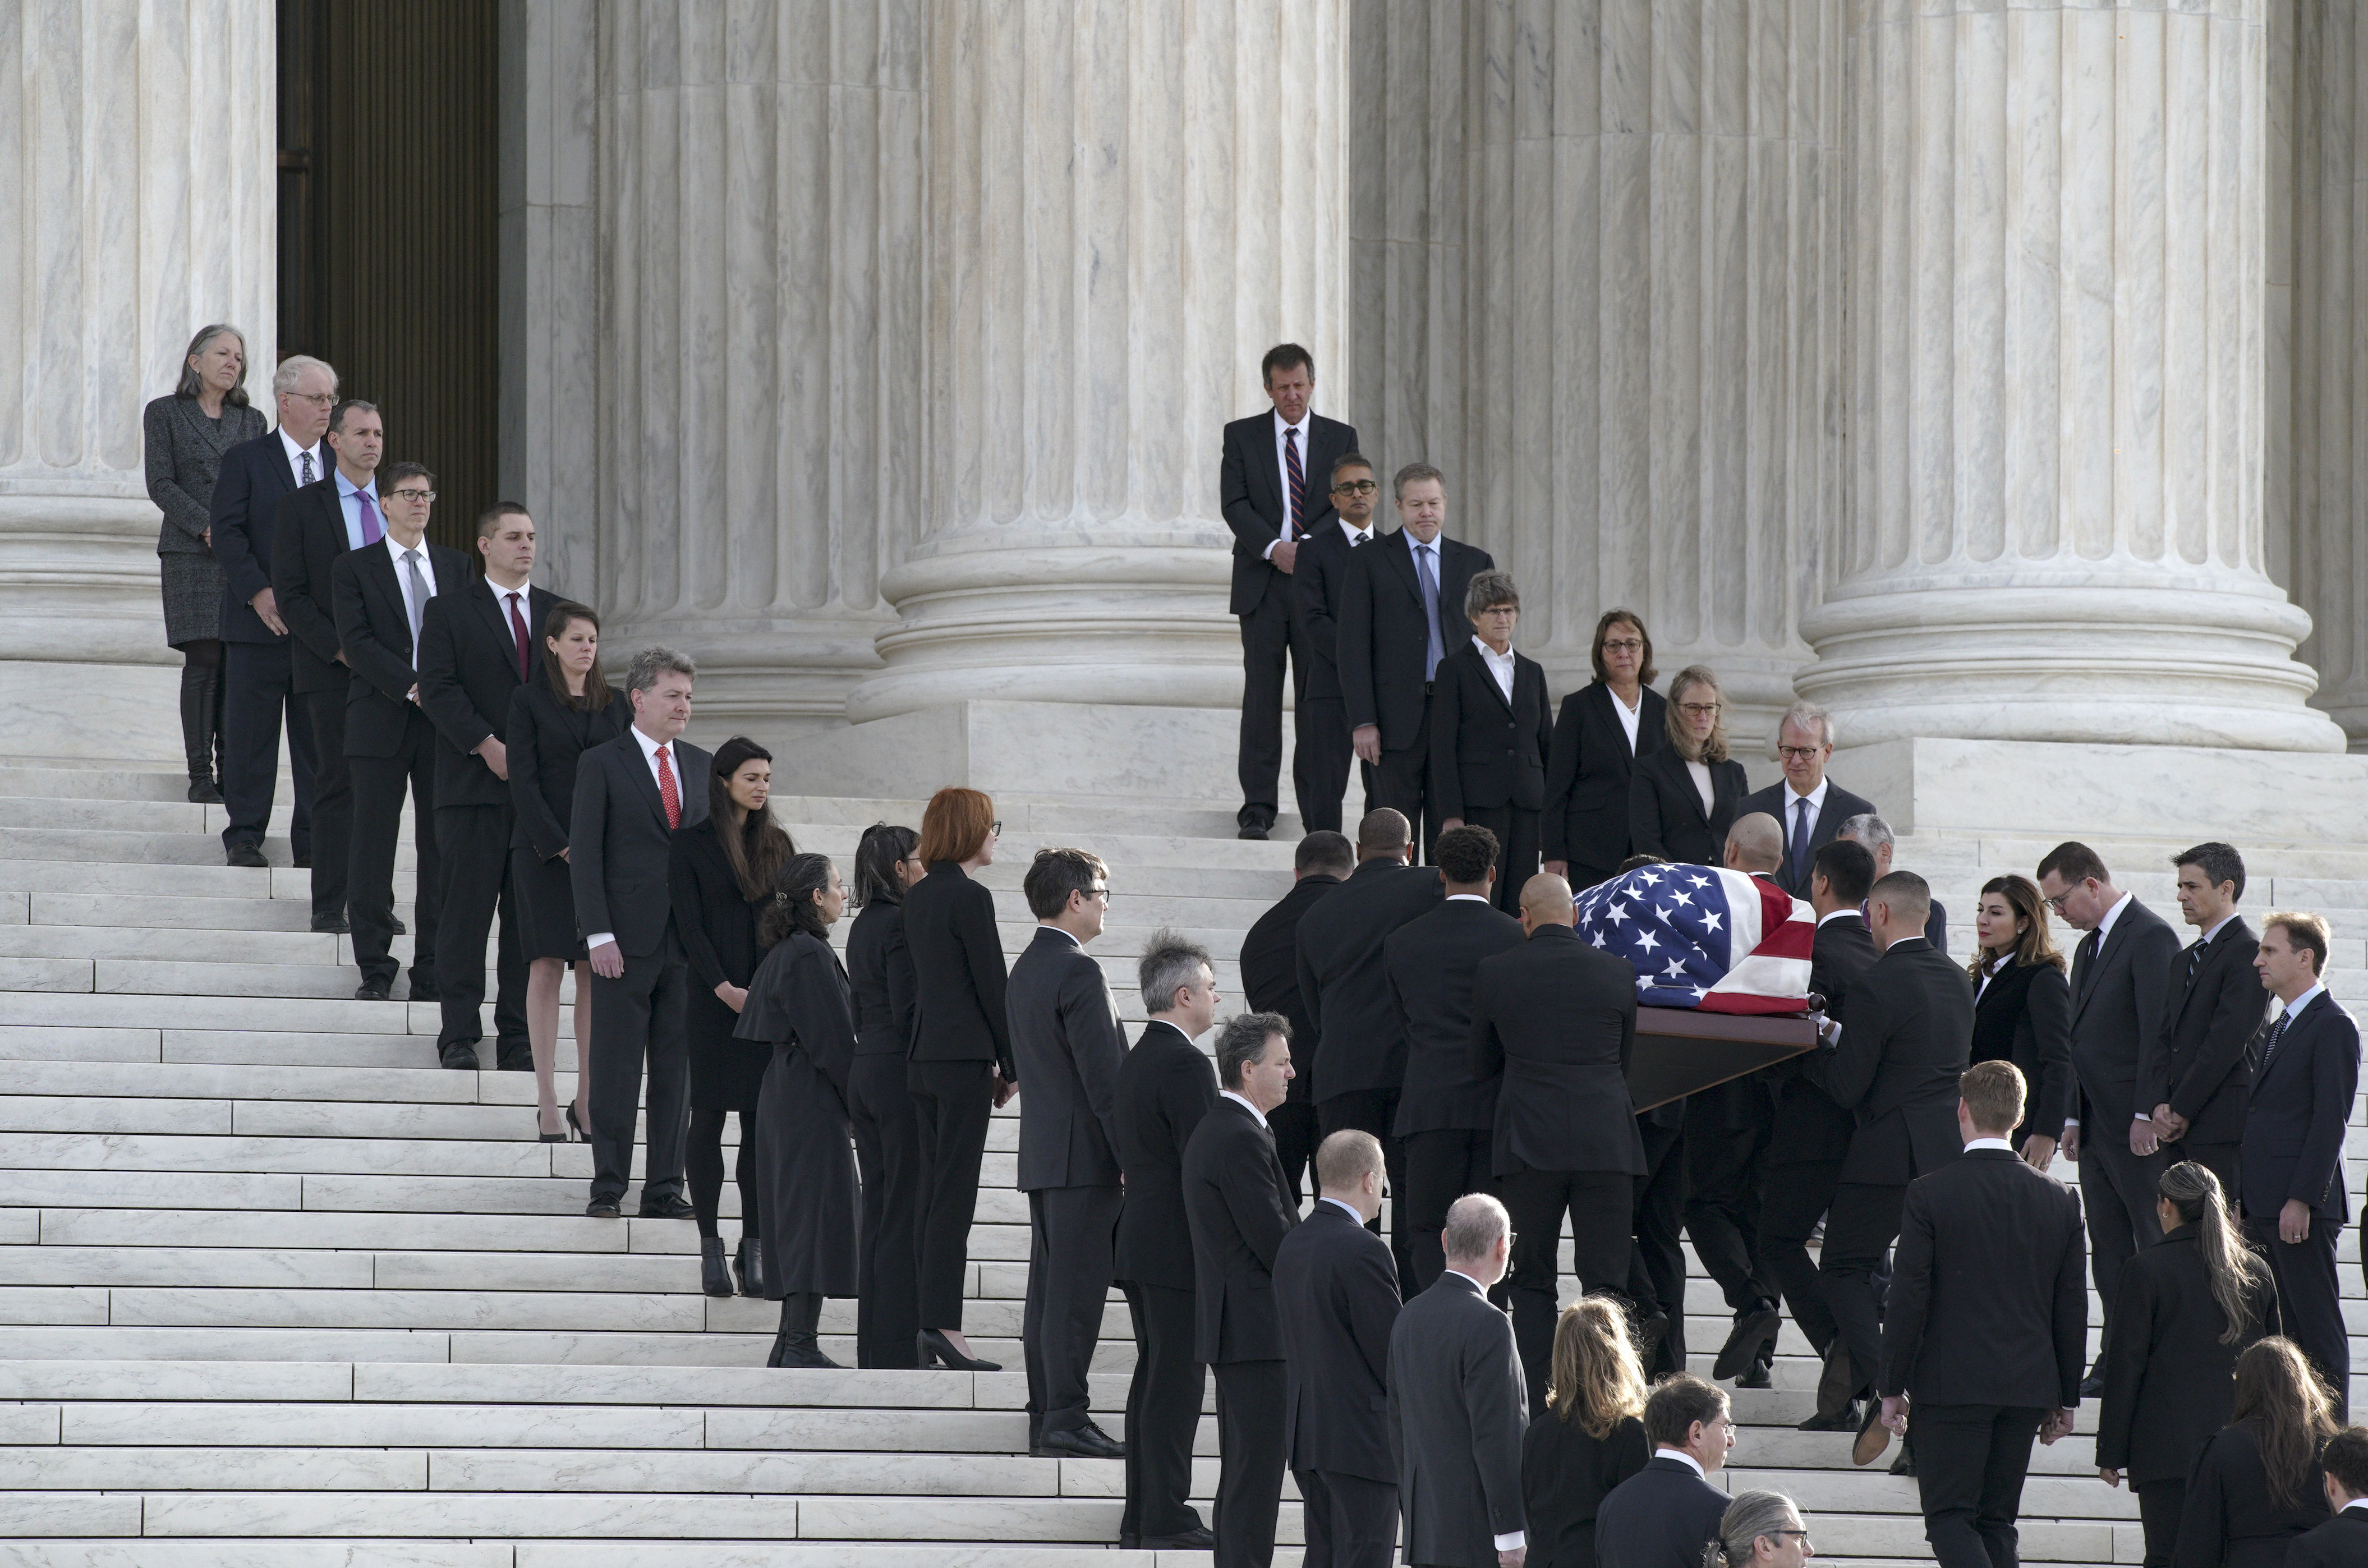 photos: the late sandra day o’connor, the first woman to serve as a u.s. supreme court justice, lies in repose at the supreme court.